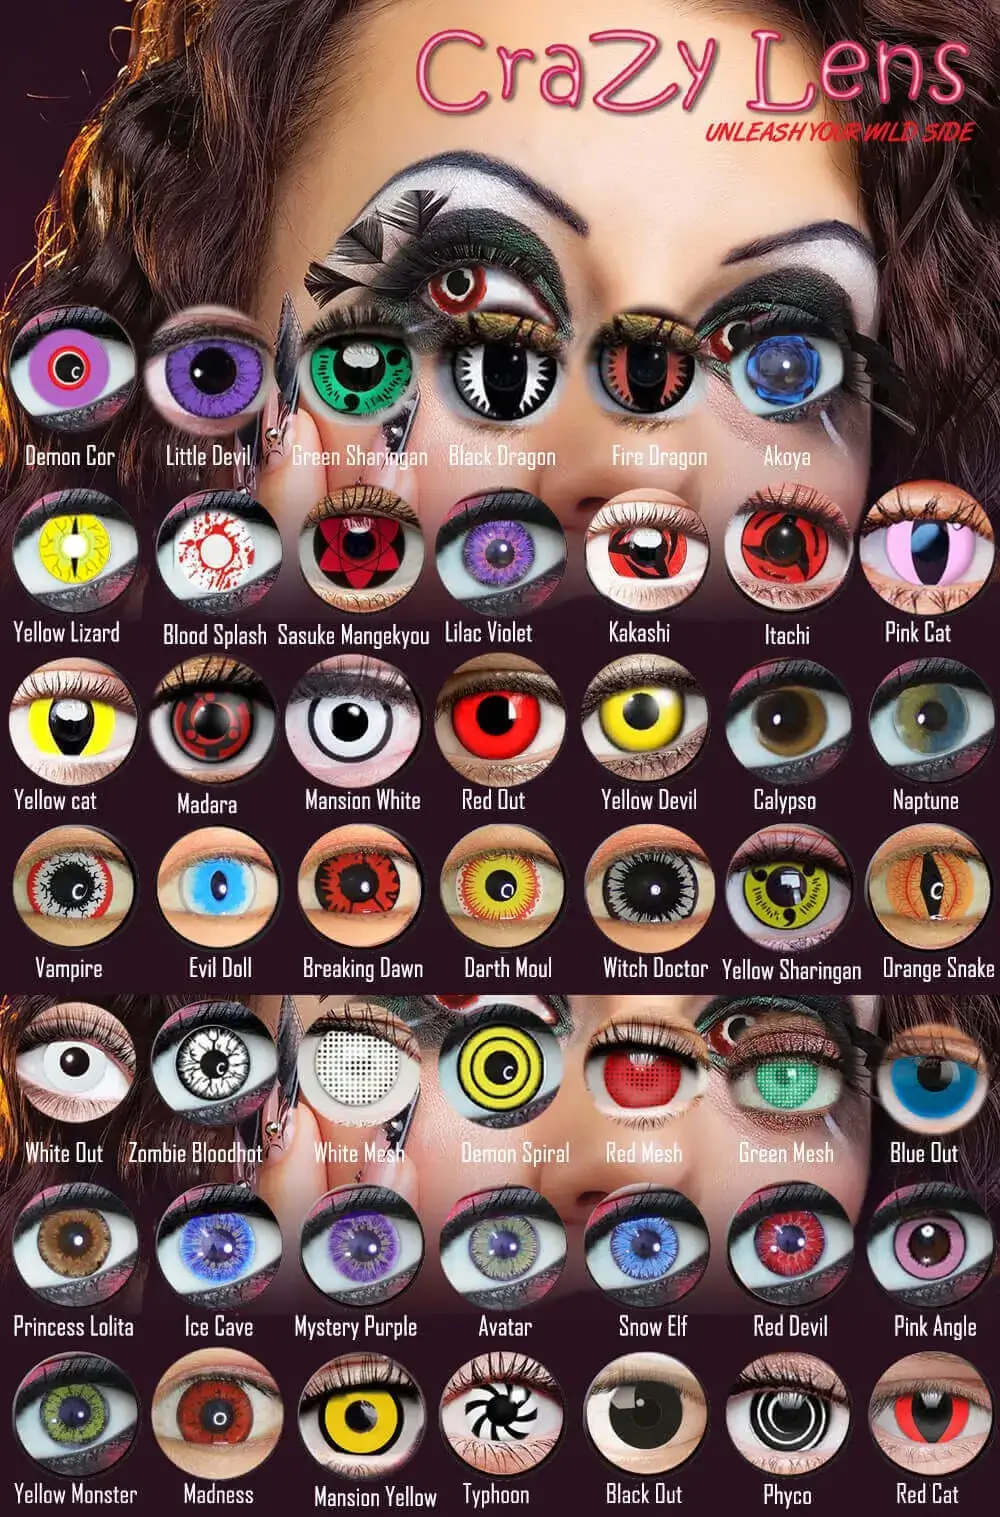 Pink Yellow Dragon Eye Halloween Contacts - Colored Contact Lenses